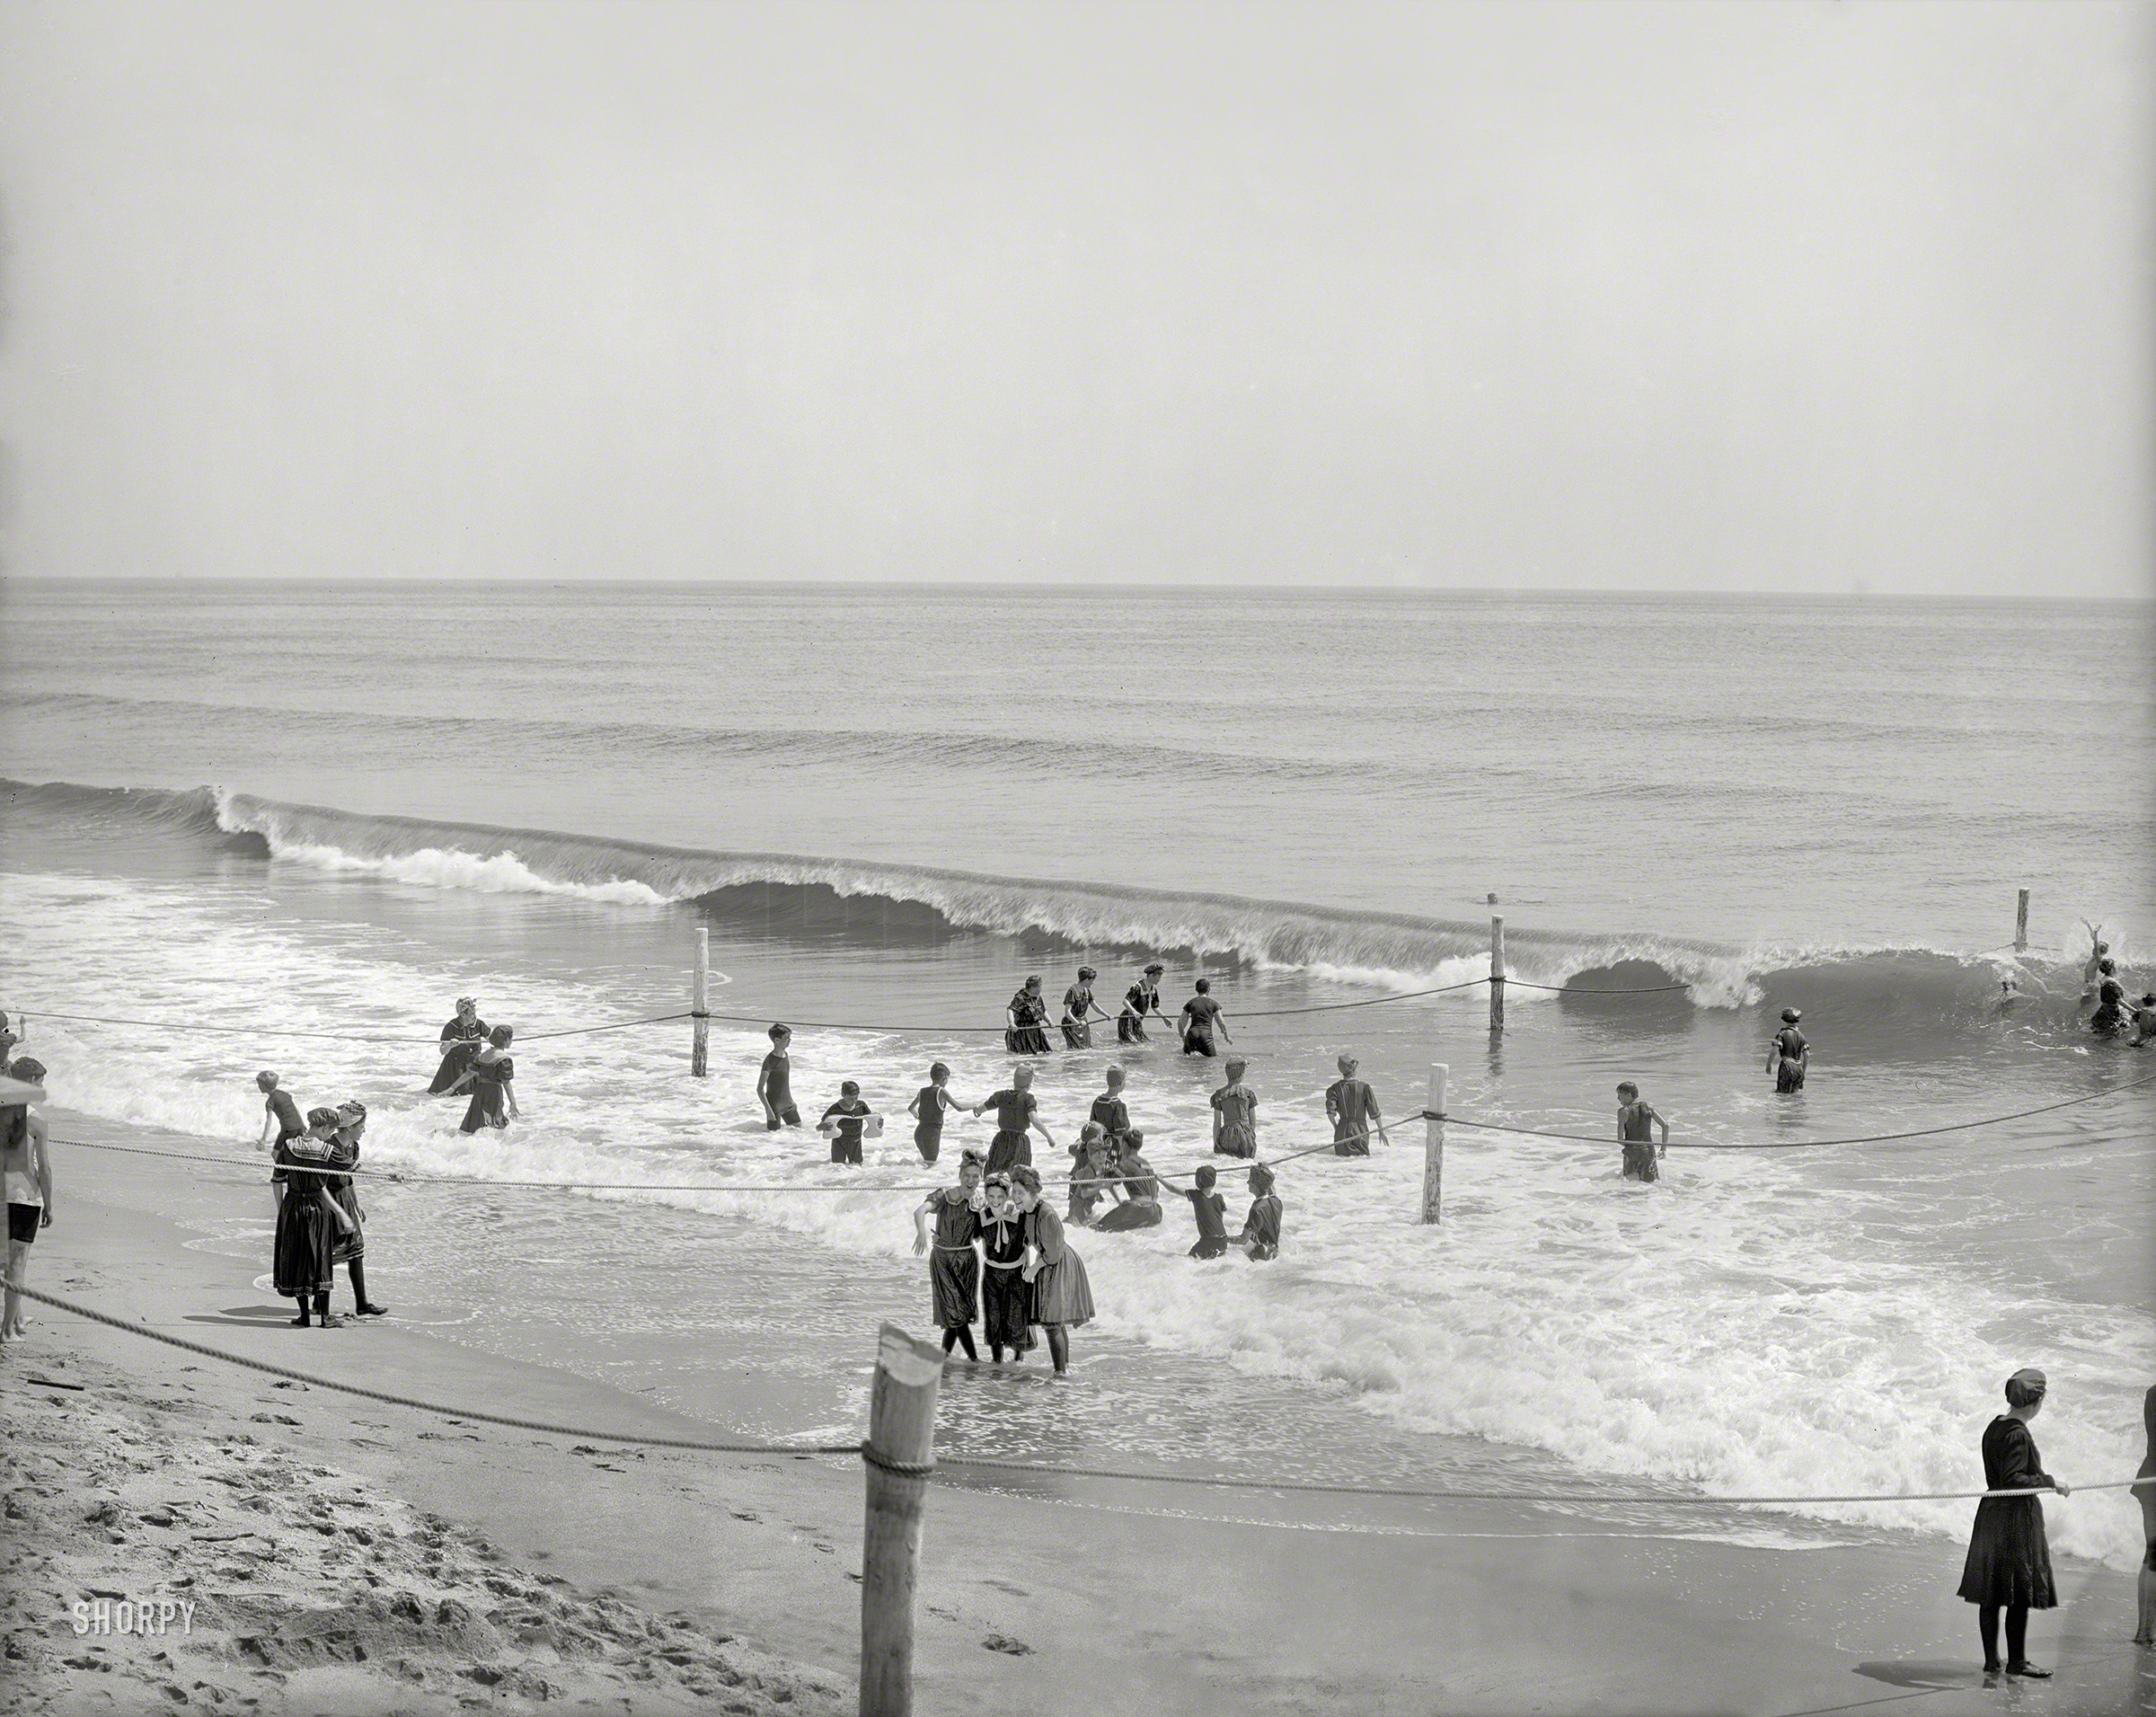 The Jersey Shore circa 1905. "In the surf at Asbury Park." Having a wonderful time; wish we were still here. 8x10 inch dry plate glass negative. View full size.